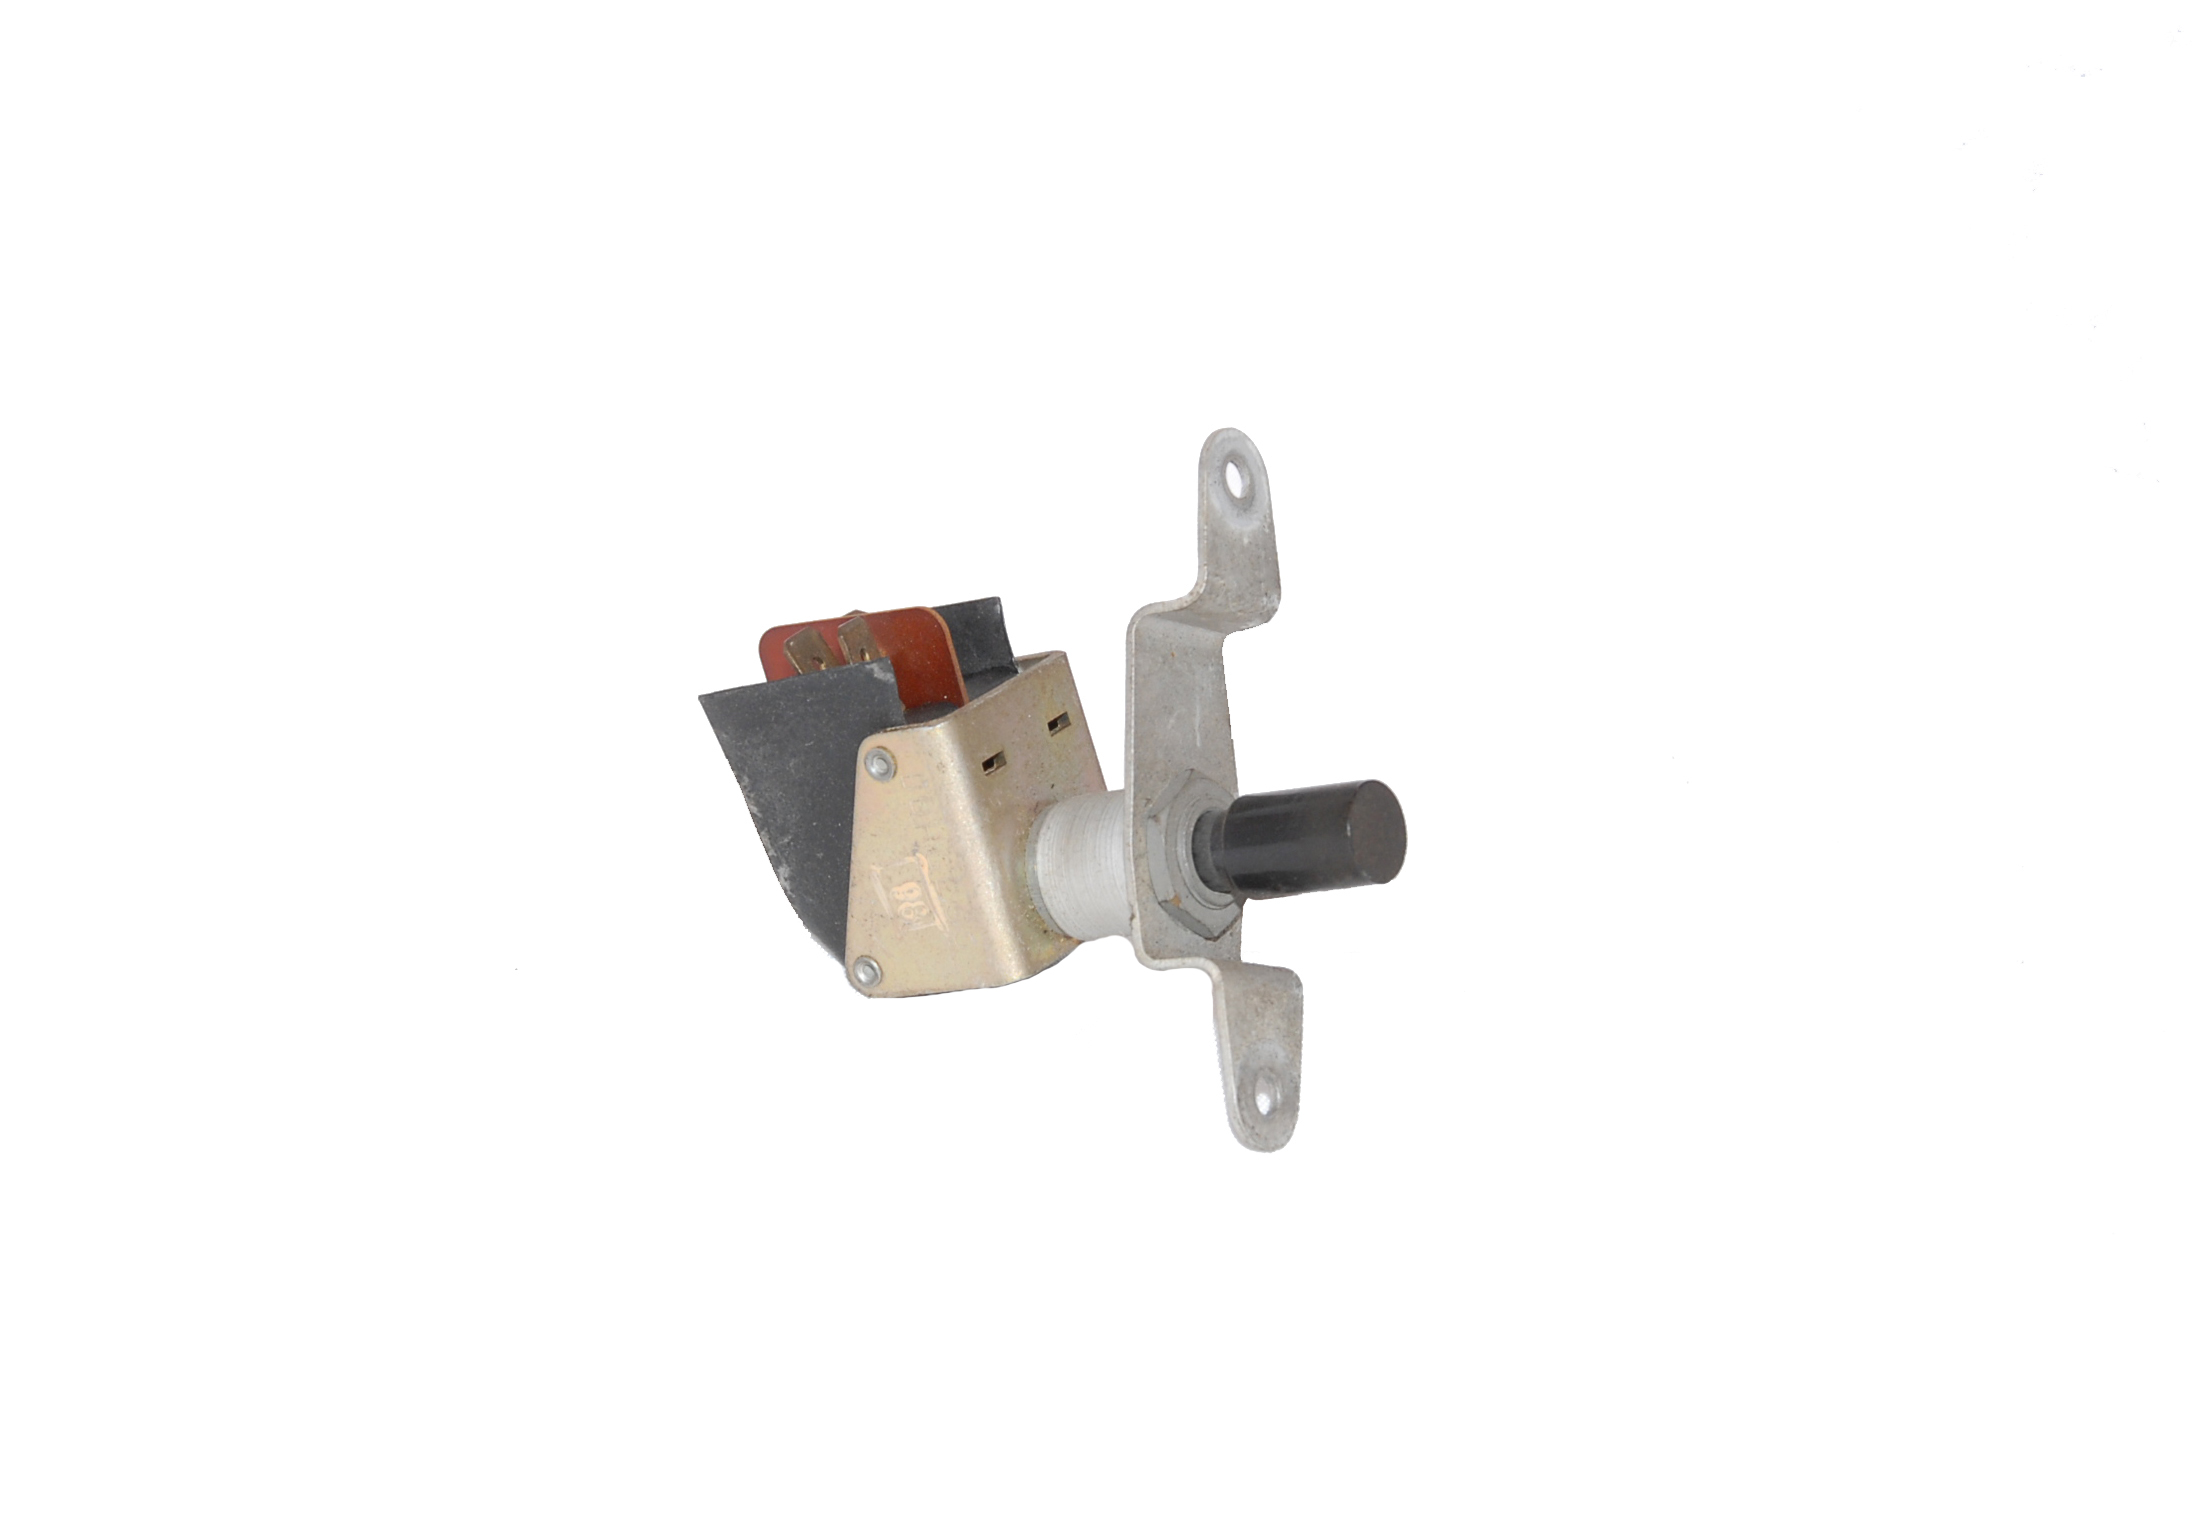 Fuel and Oil Level Switch with Knob (UD14902U)